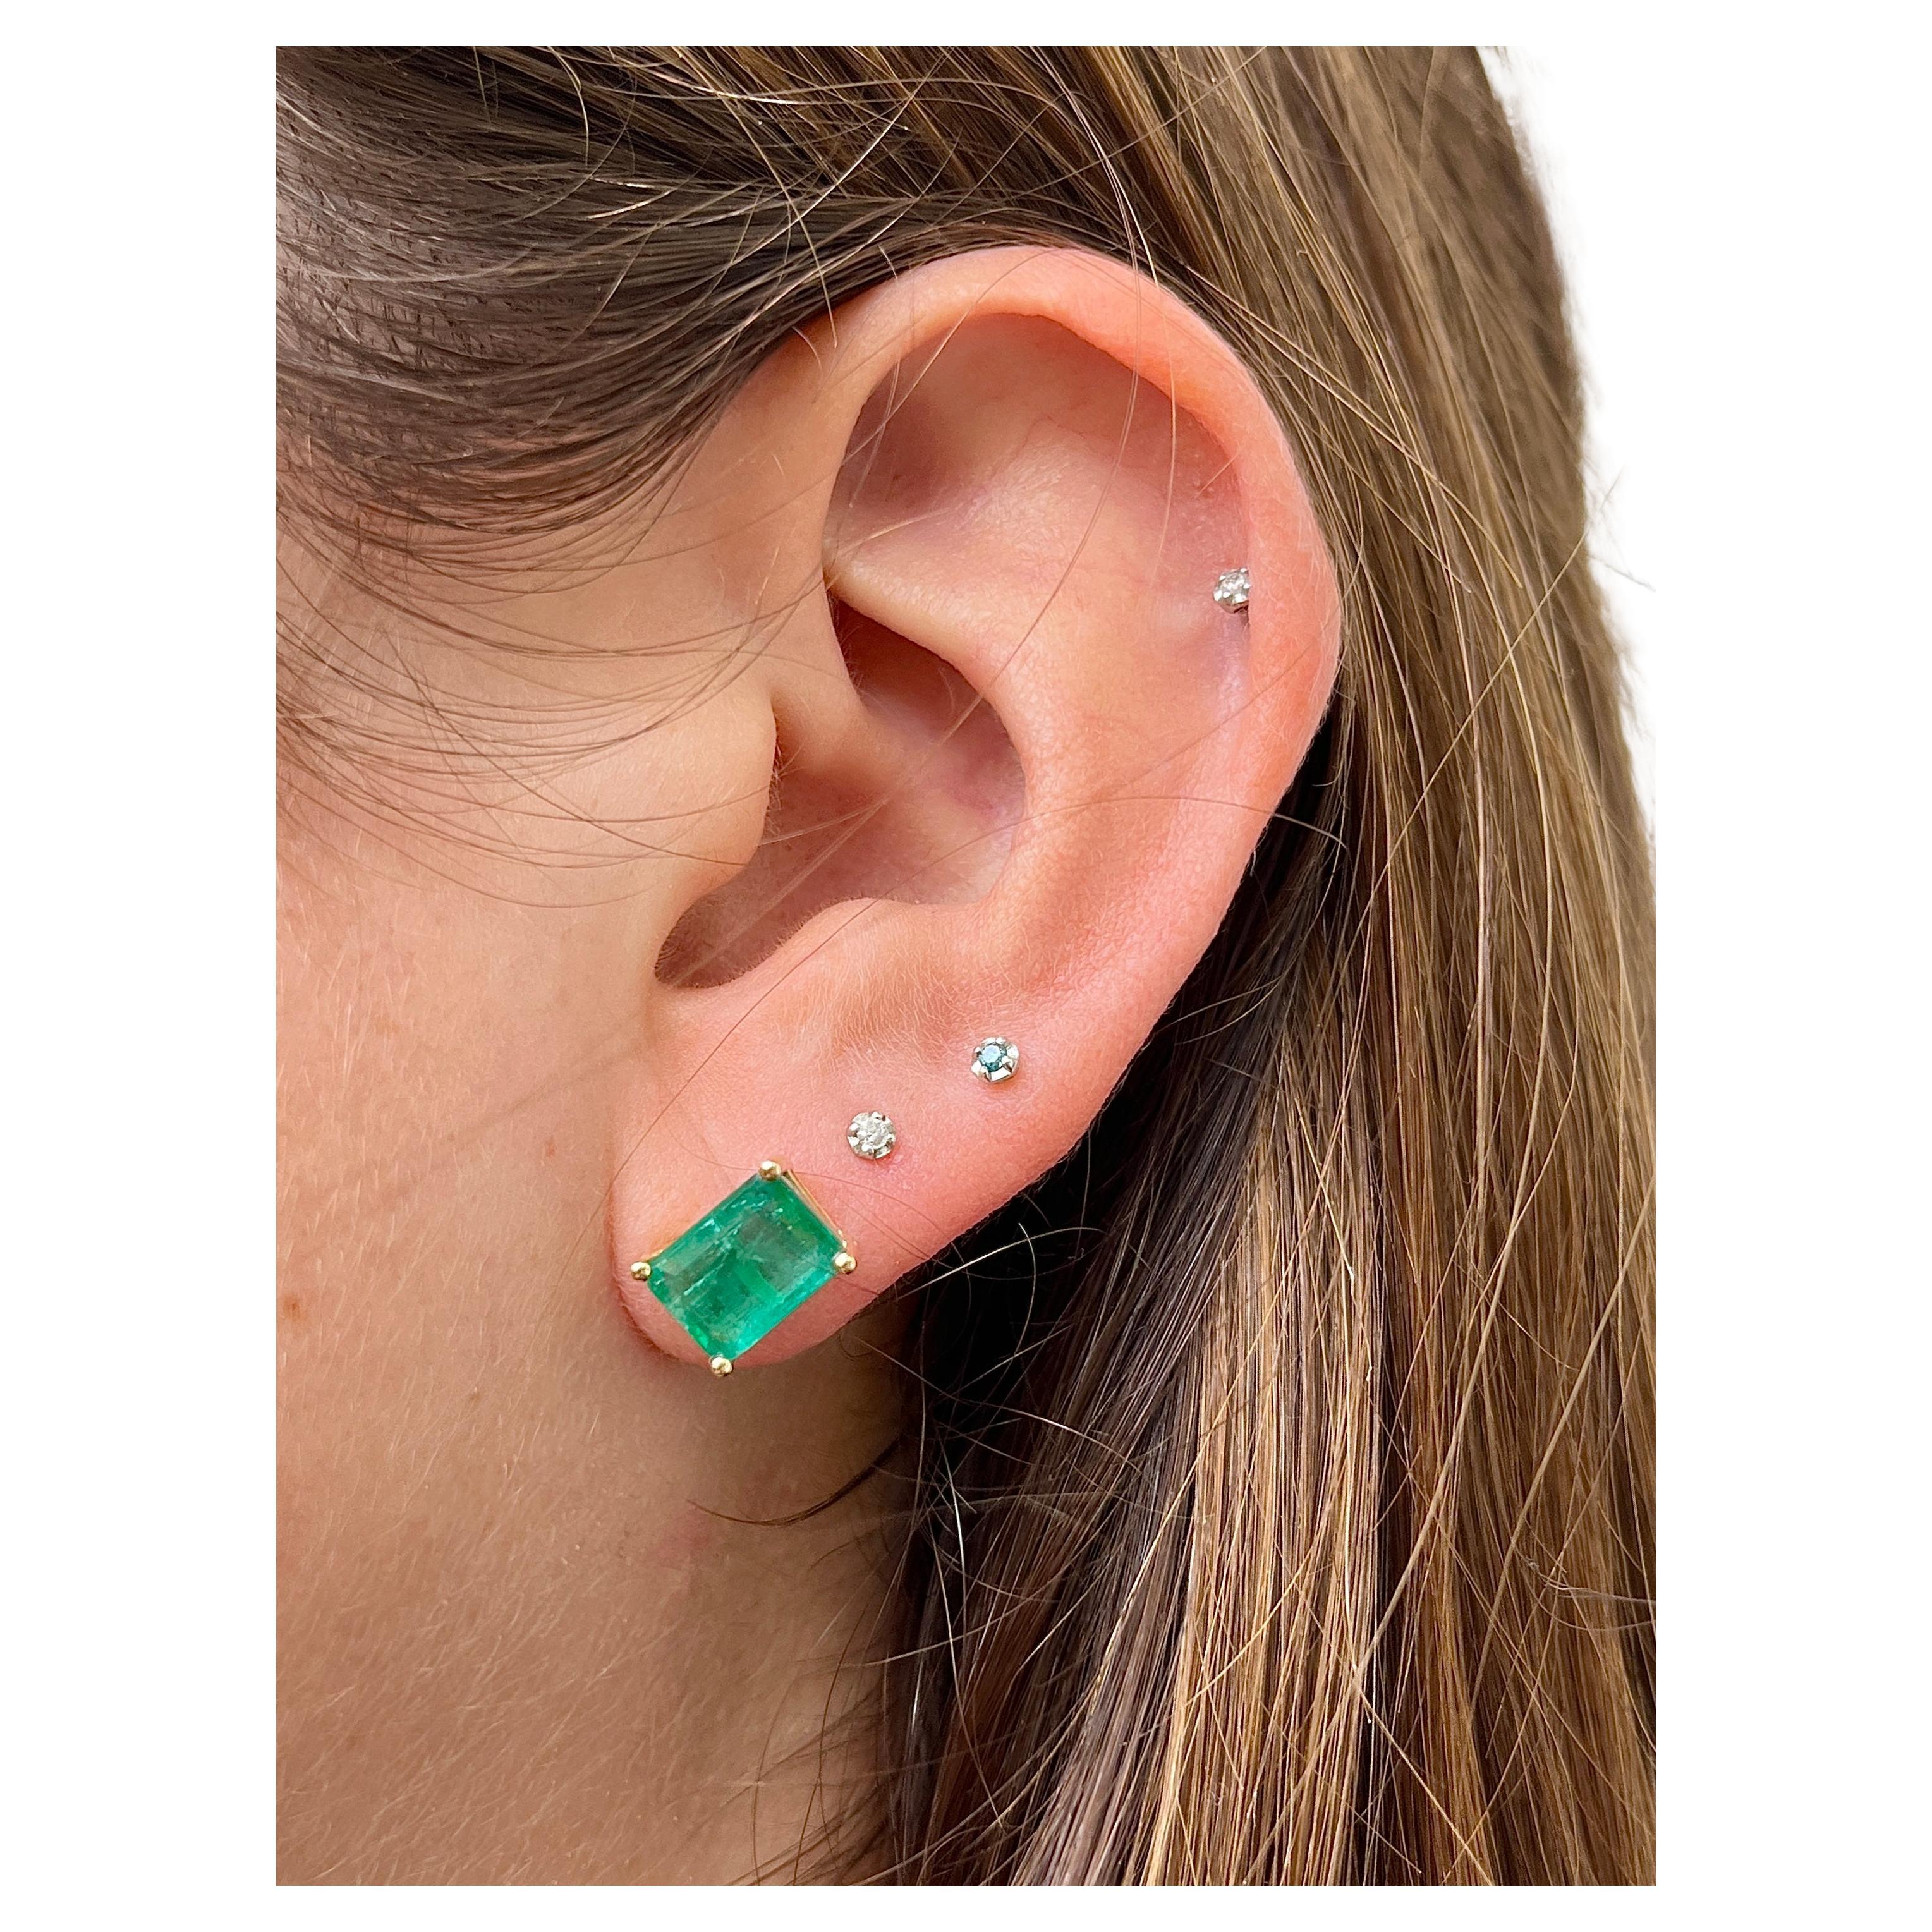 Our stunning 4.77 carat total weight natural emerald cut emerald stud earrings are a testament to the opulence of fine jewelry. With vibrant green gemstones and expert craftsmanship, these earrings offer a luxurious and sophisticated addition to any